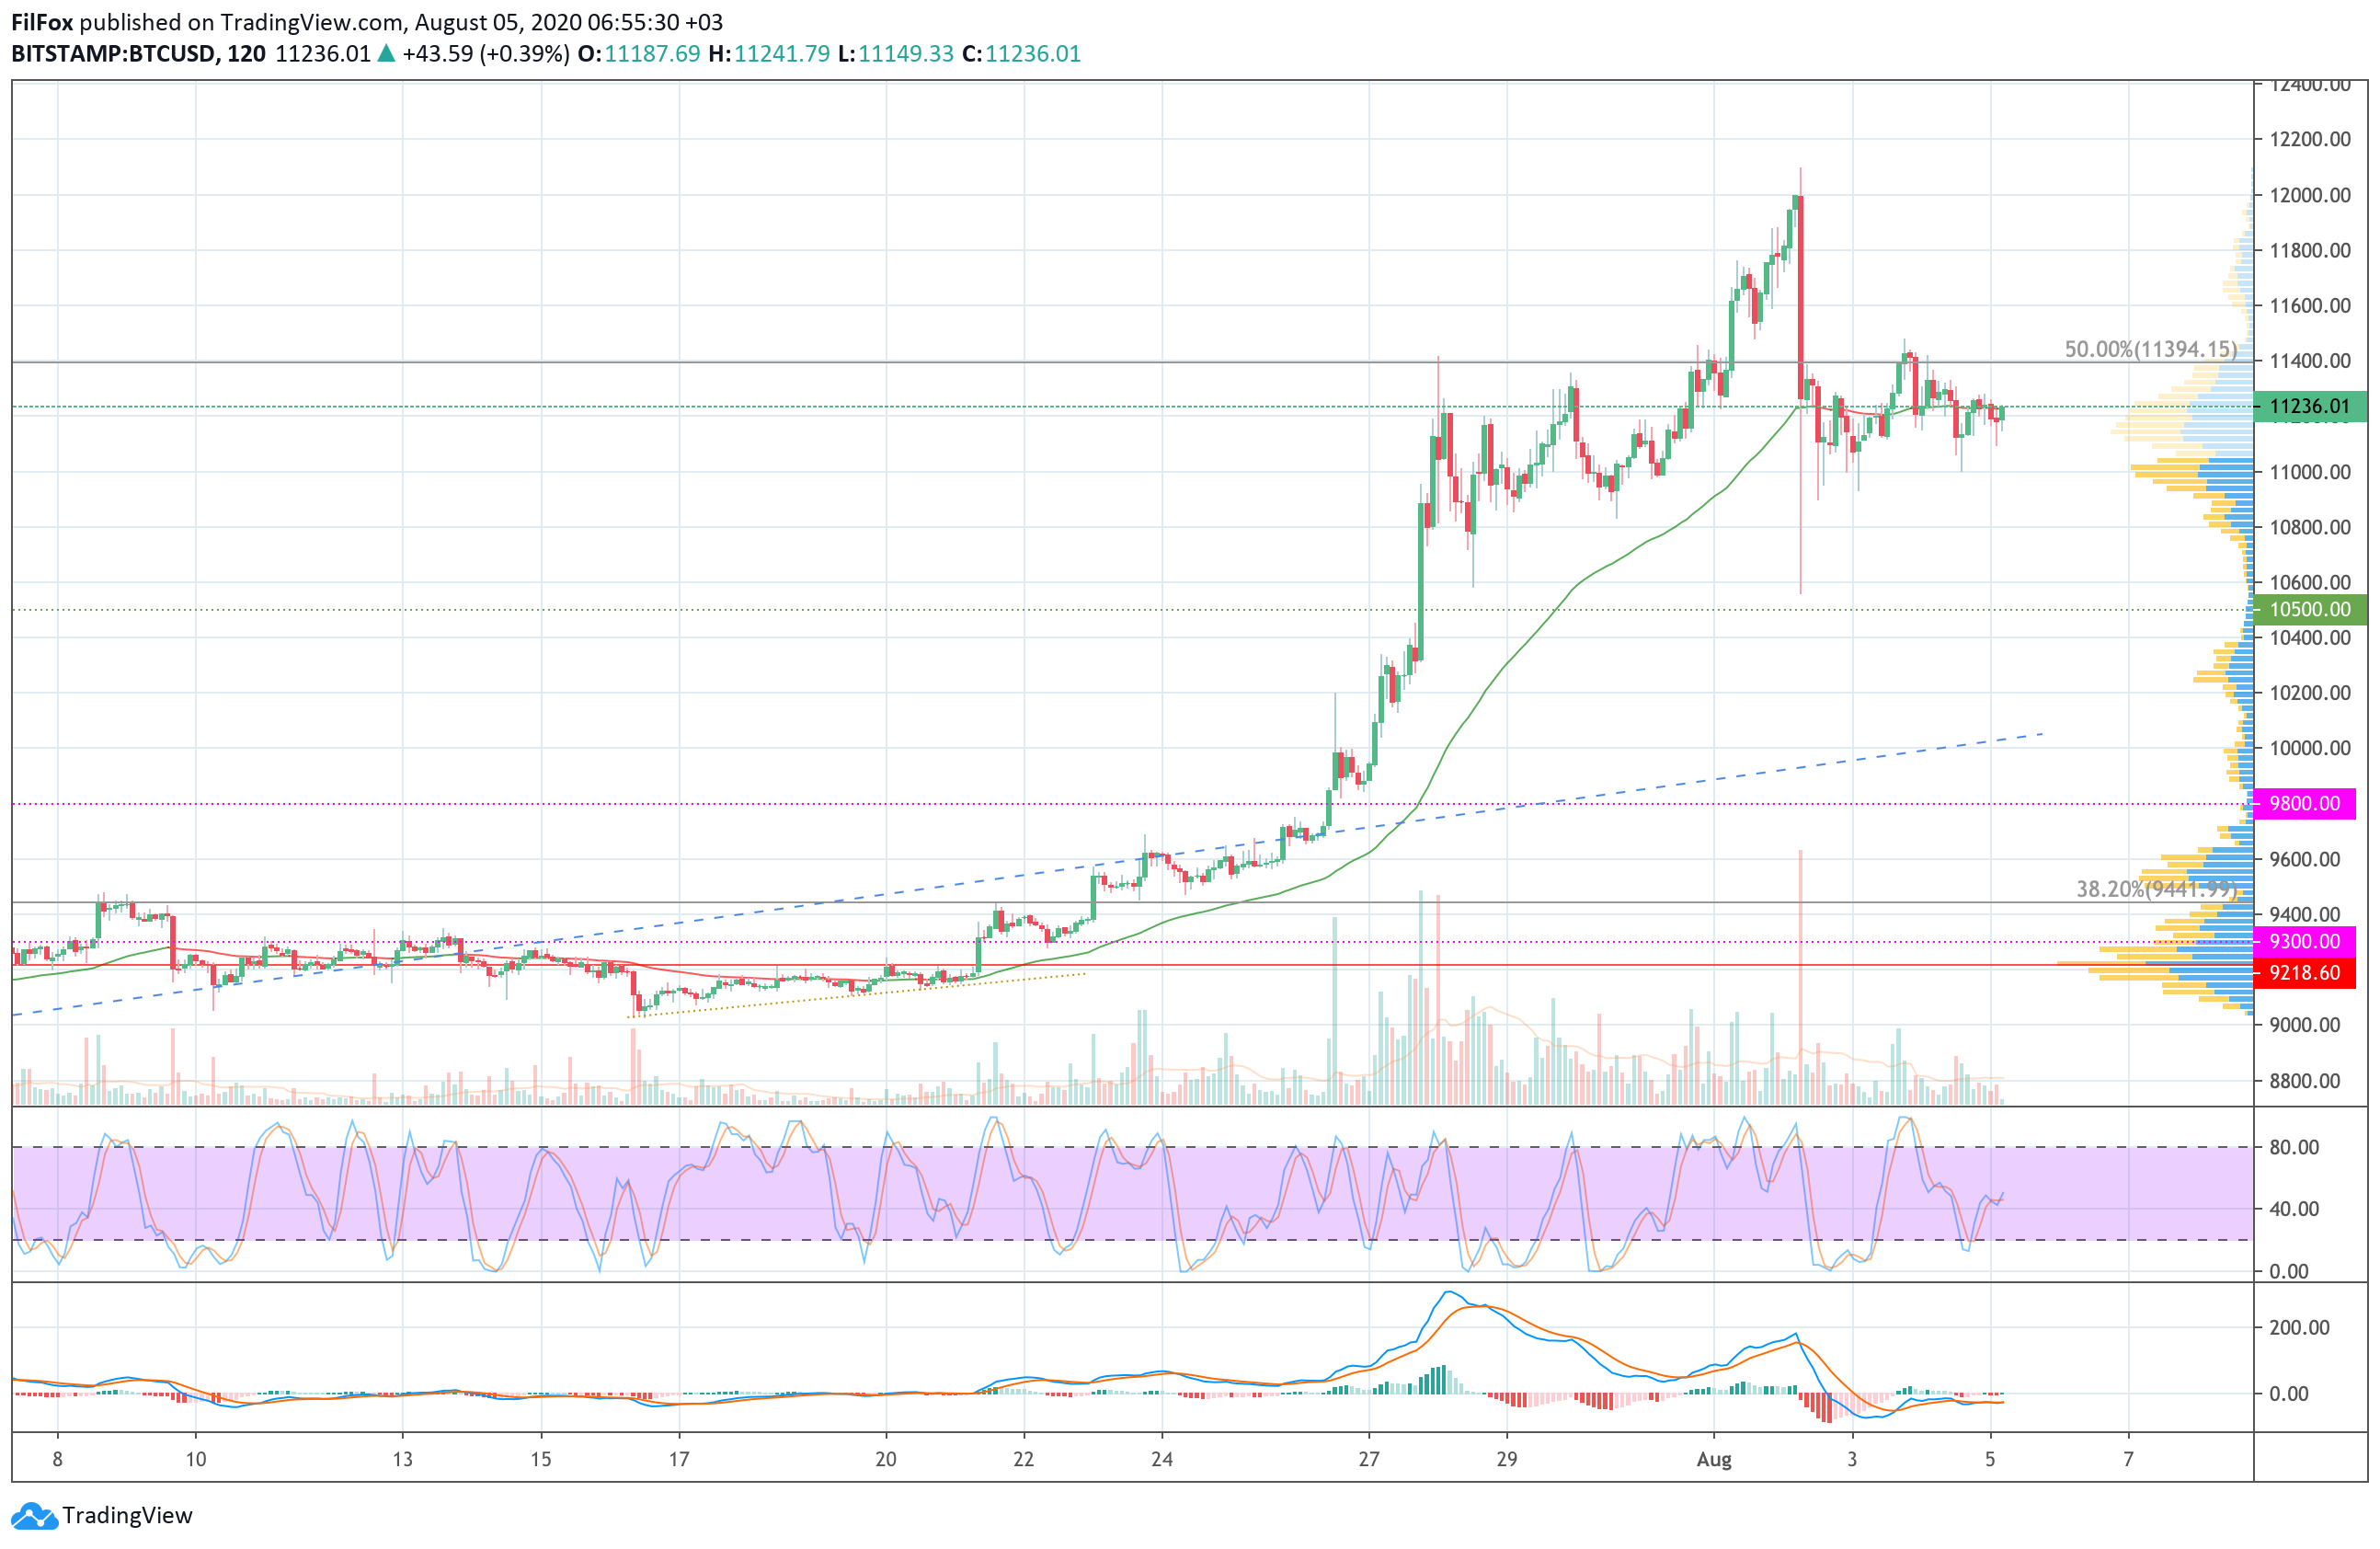 Analysis of prices for Bitcoin, Ethereum, XRP for 08/05/2020